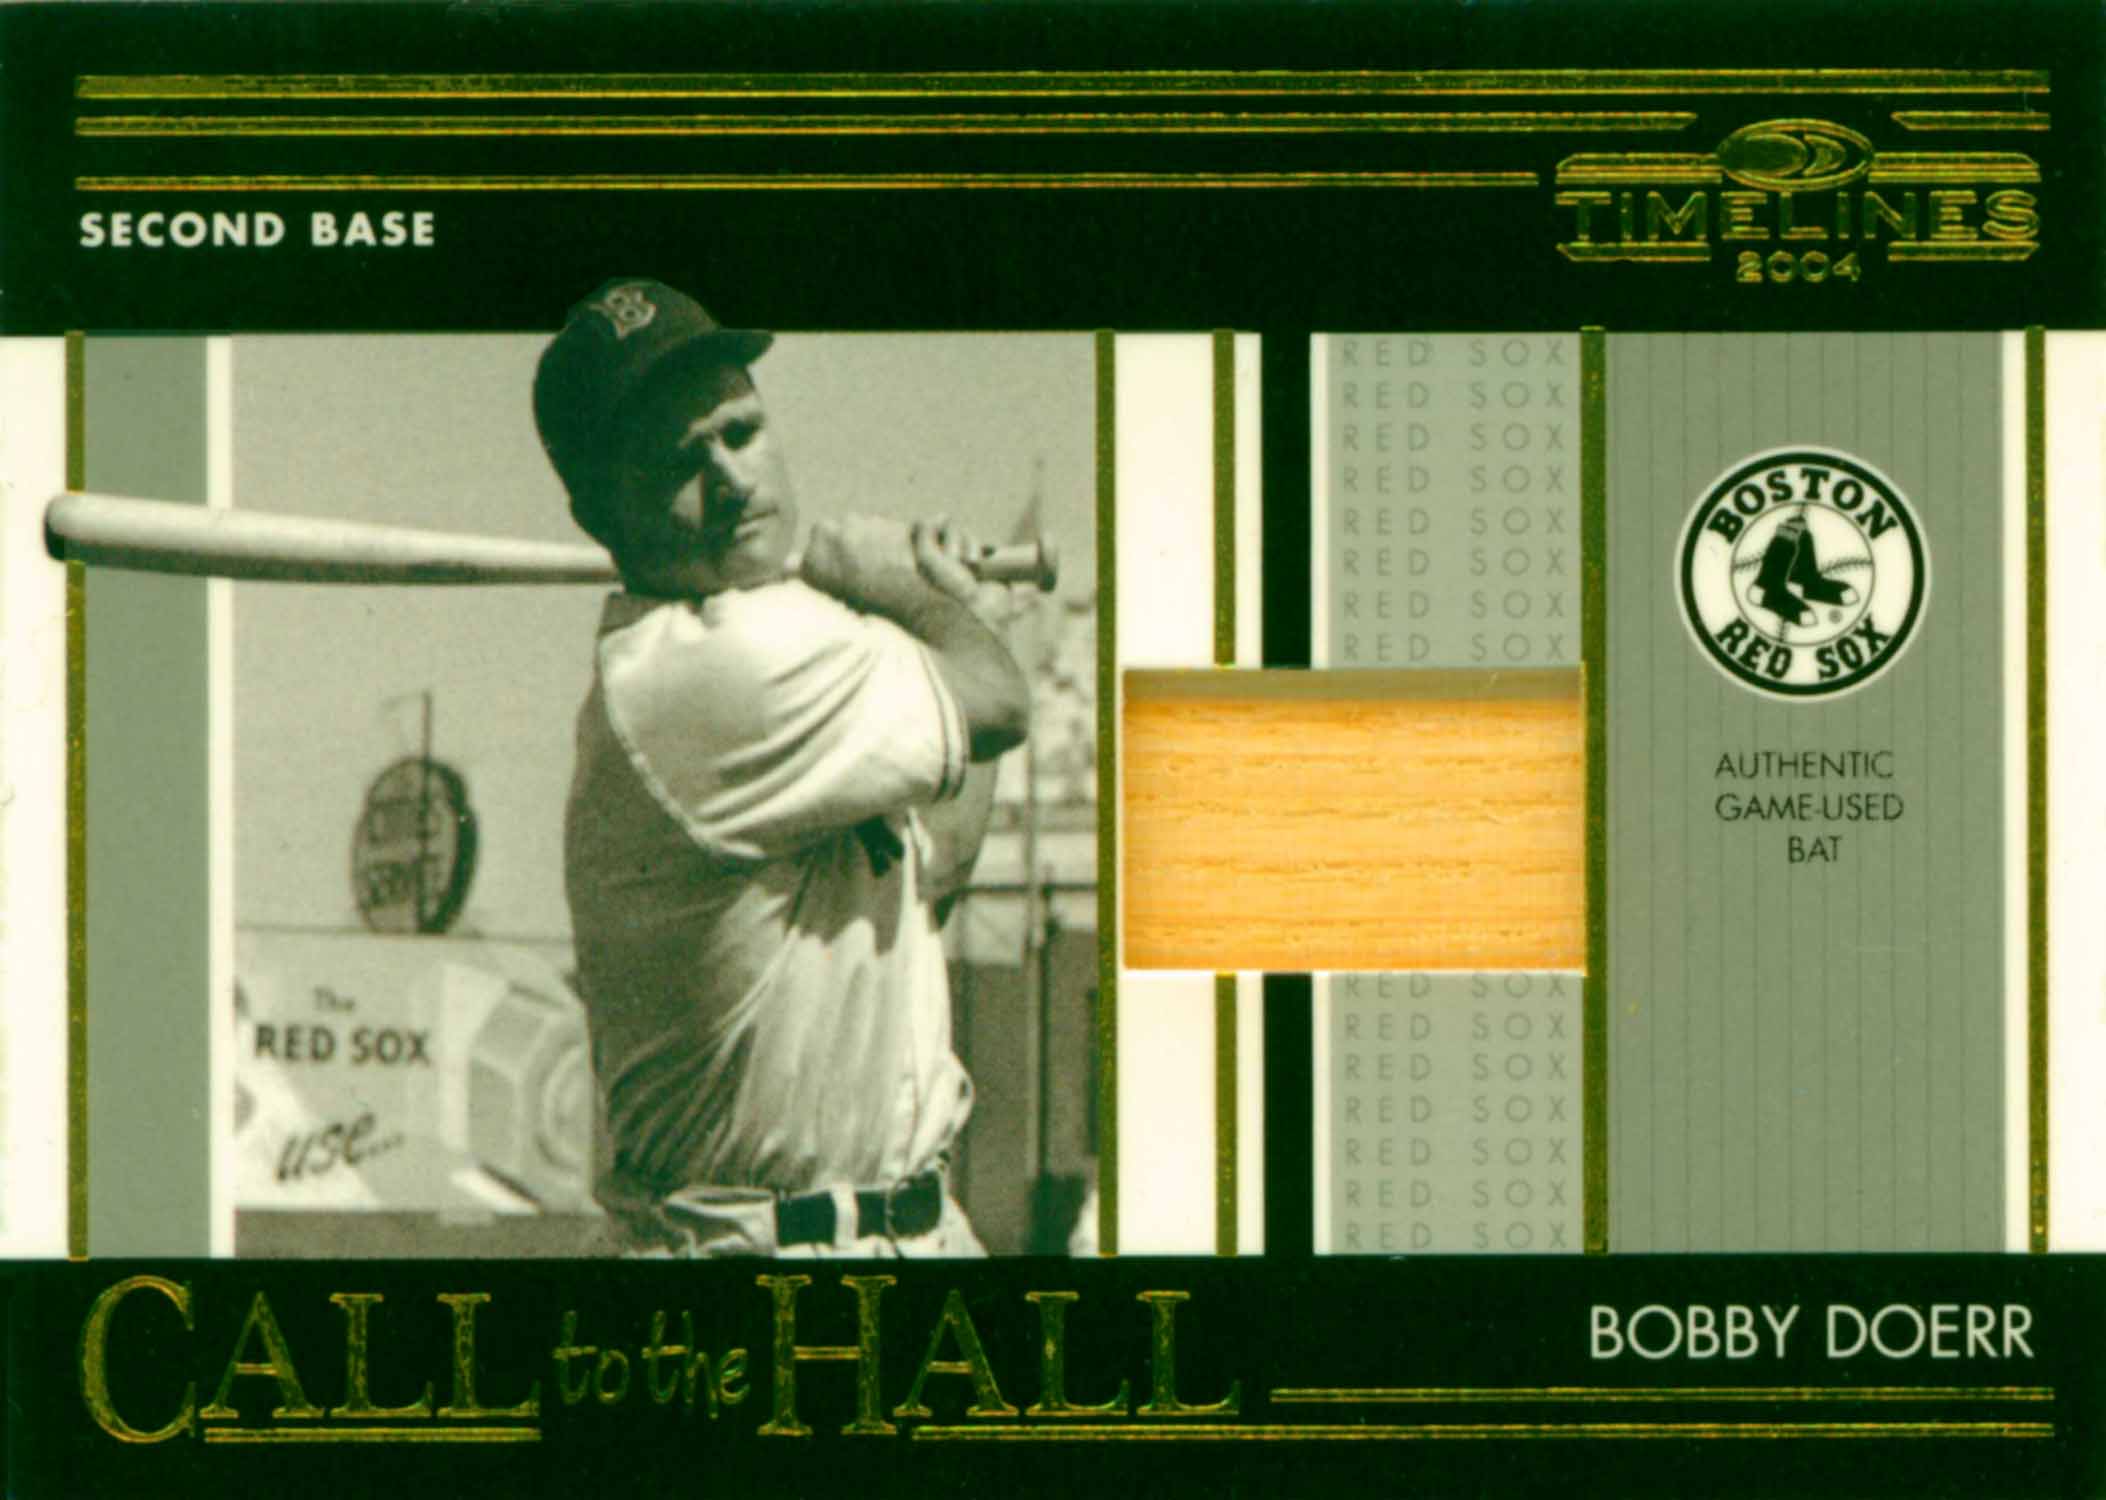 2004 Donruss Timelines Call to the Hall Material Bat